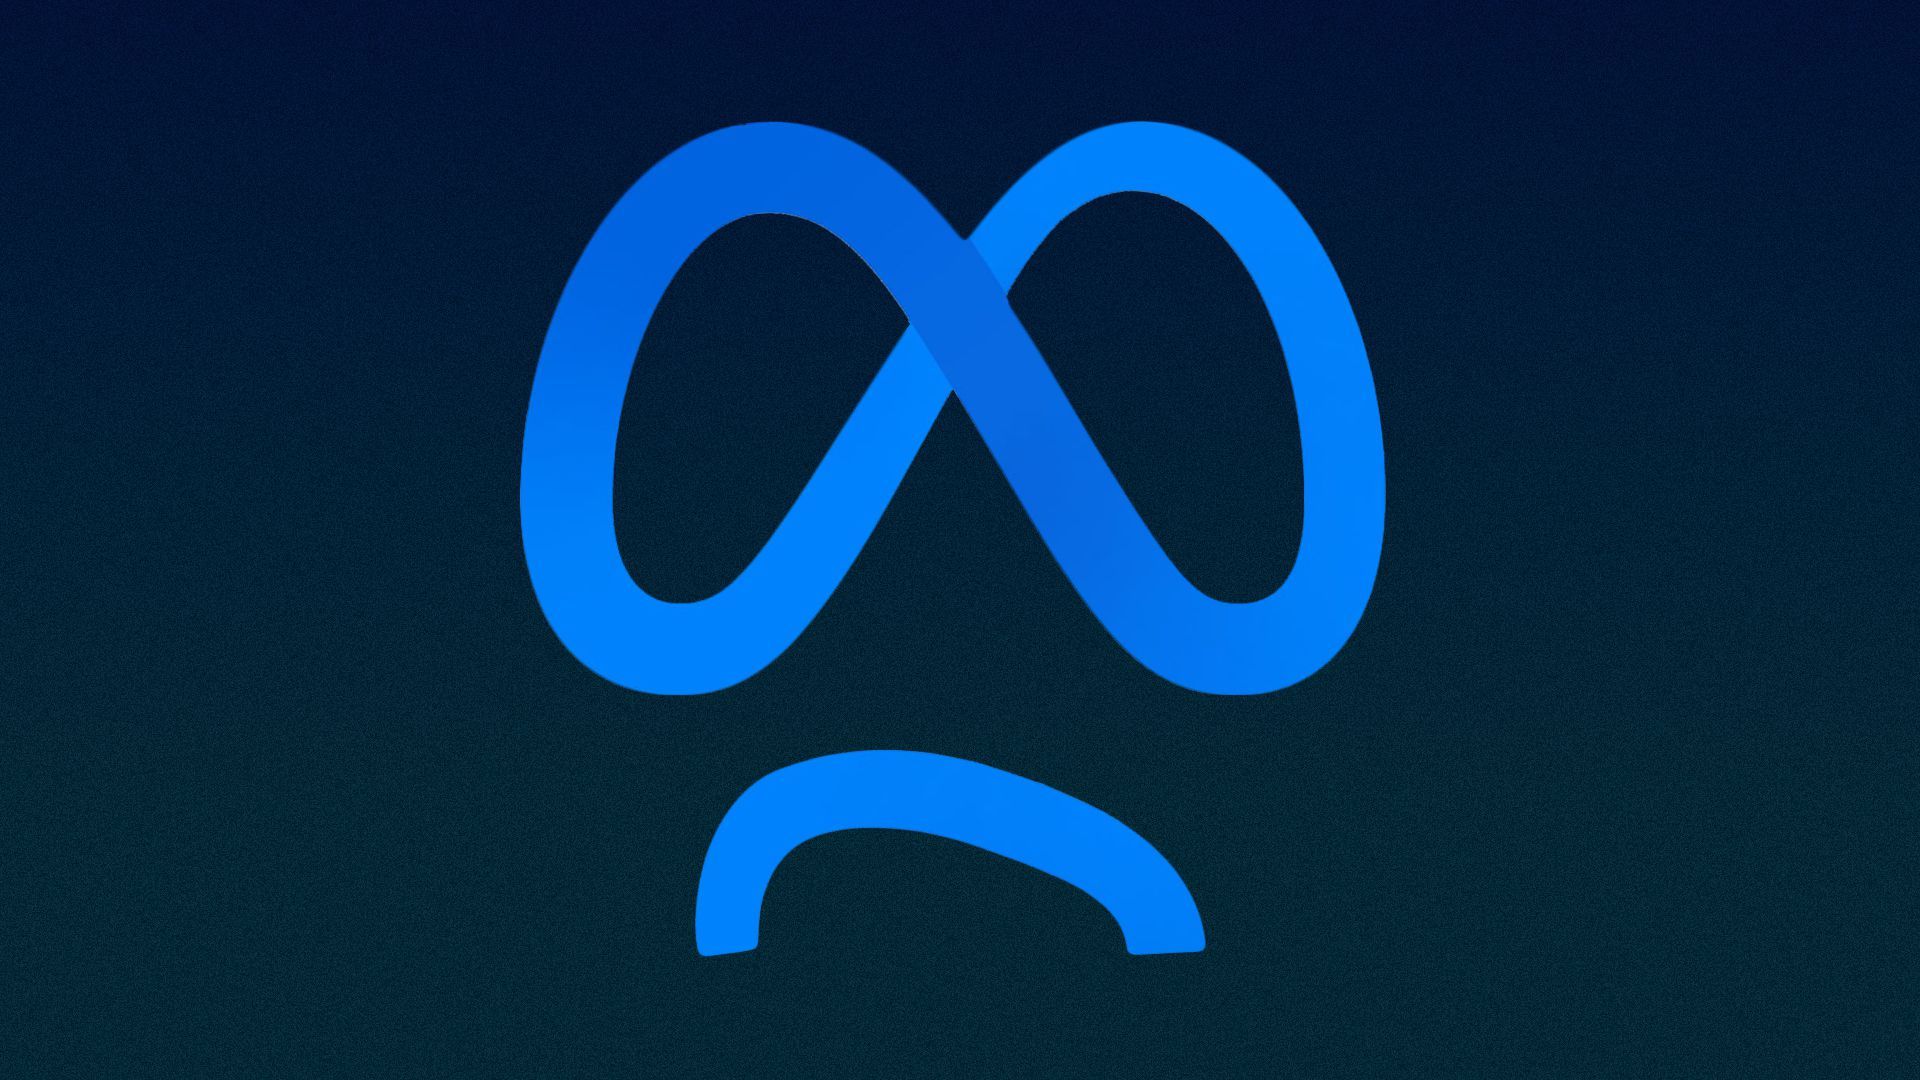 Illustration of a frowning face made from the Meta logo